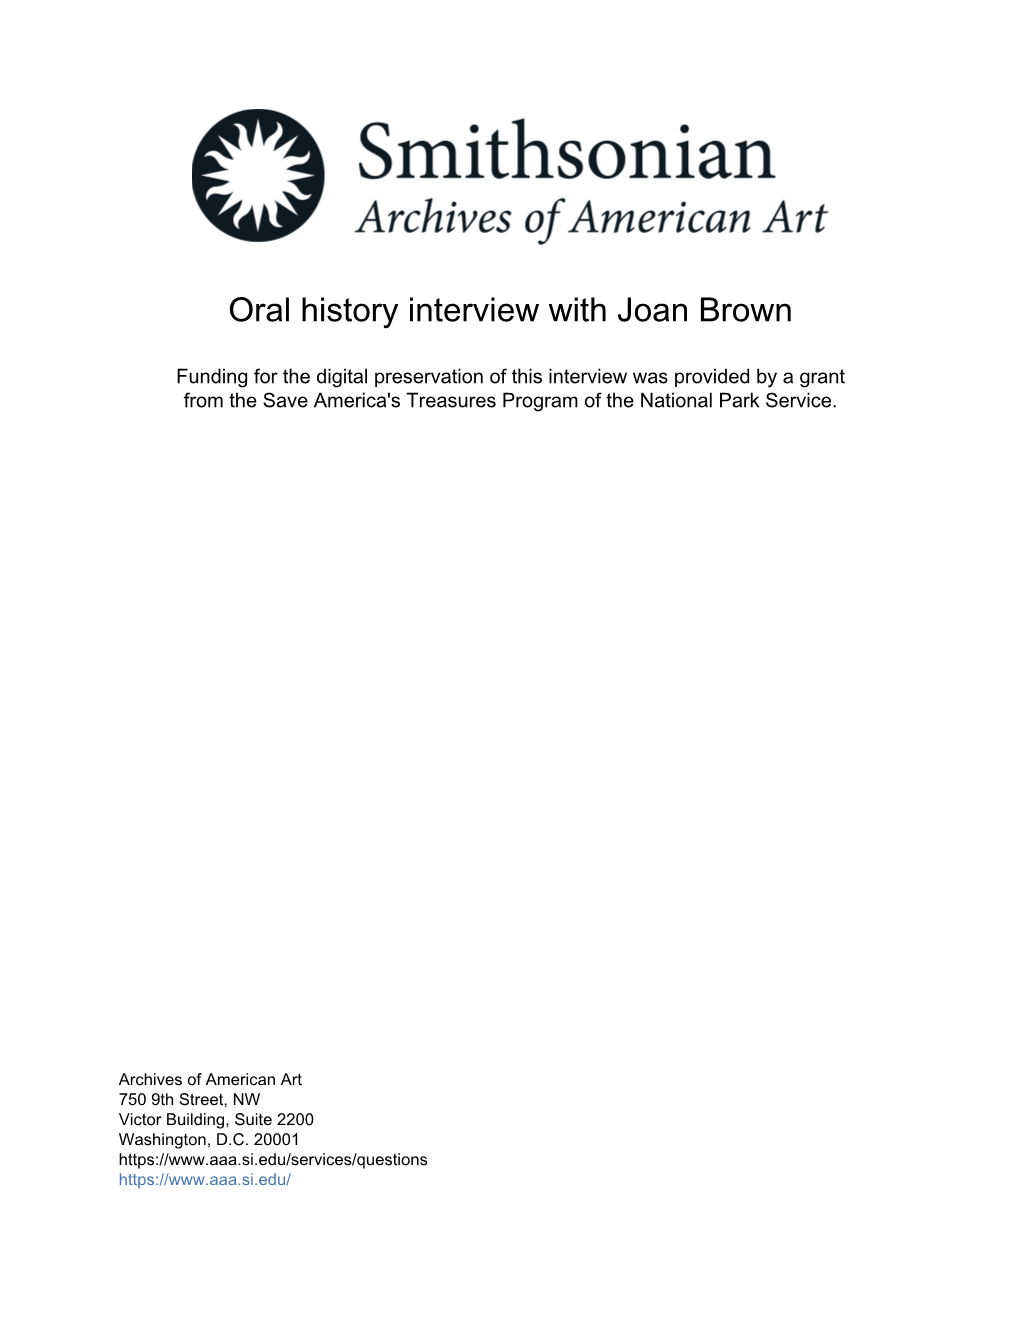 Oral History Interview with Joan Brown